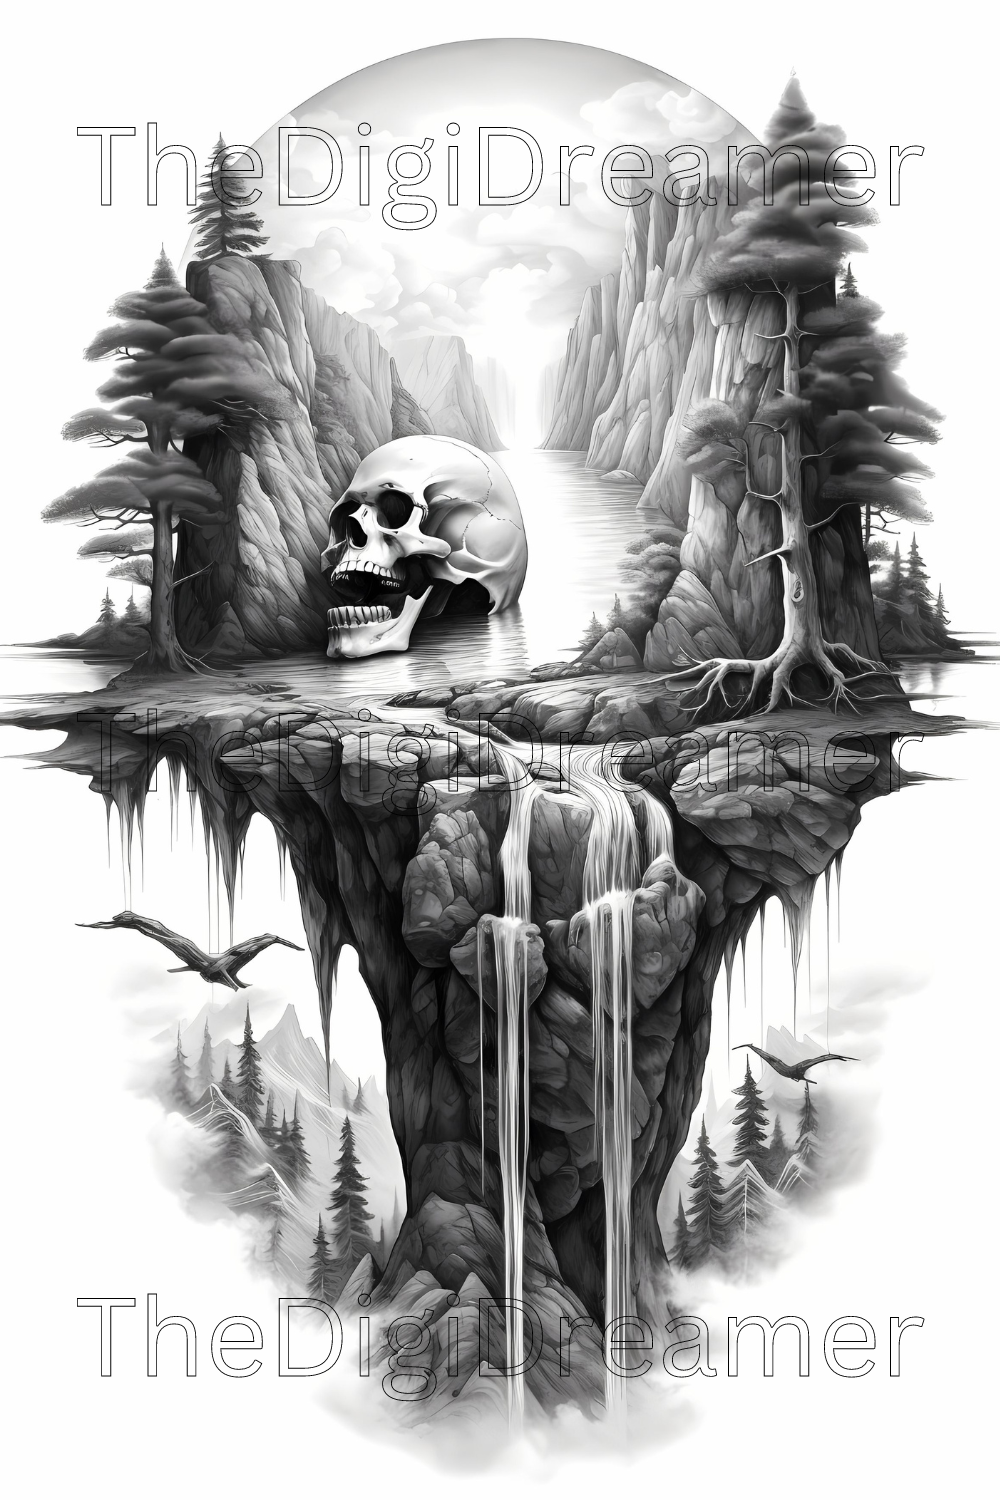 Haunted Landscapes-Grayscale Printable Coloring Pages For Adults & Kids